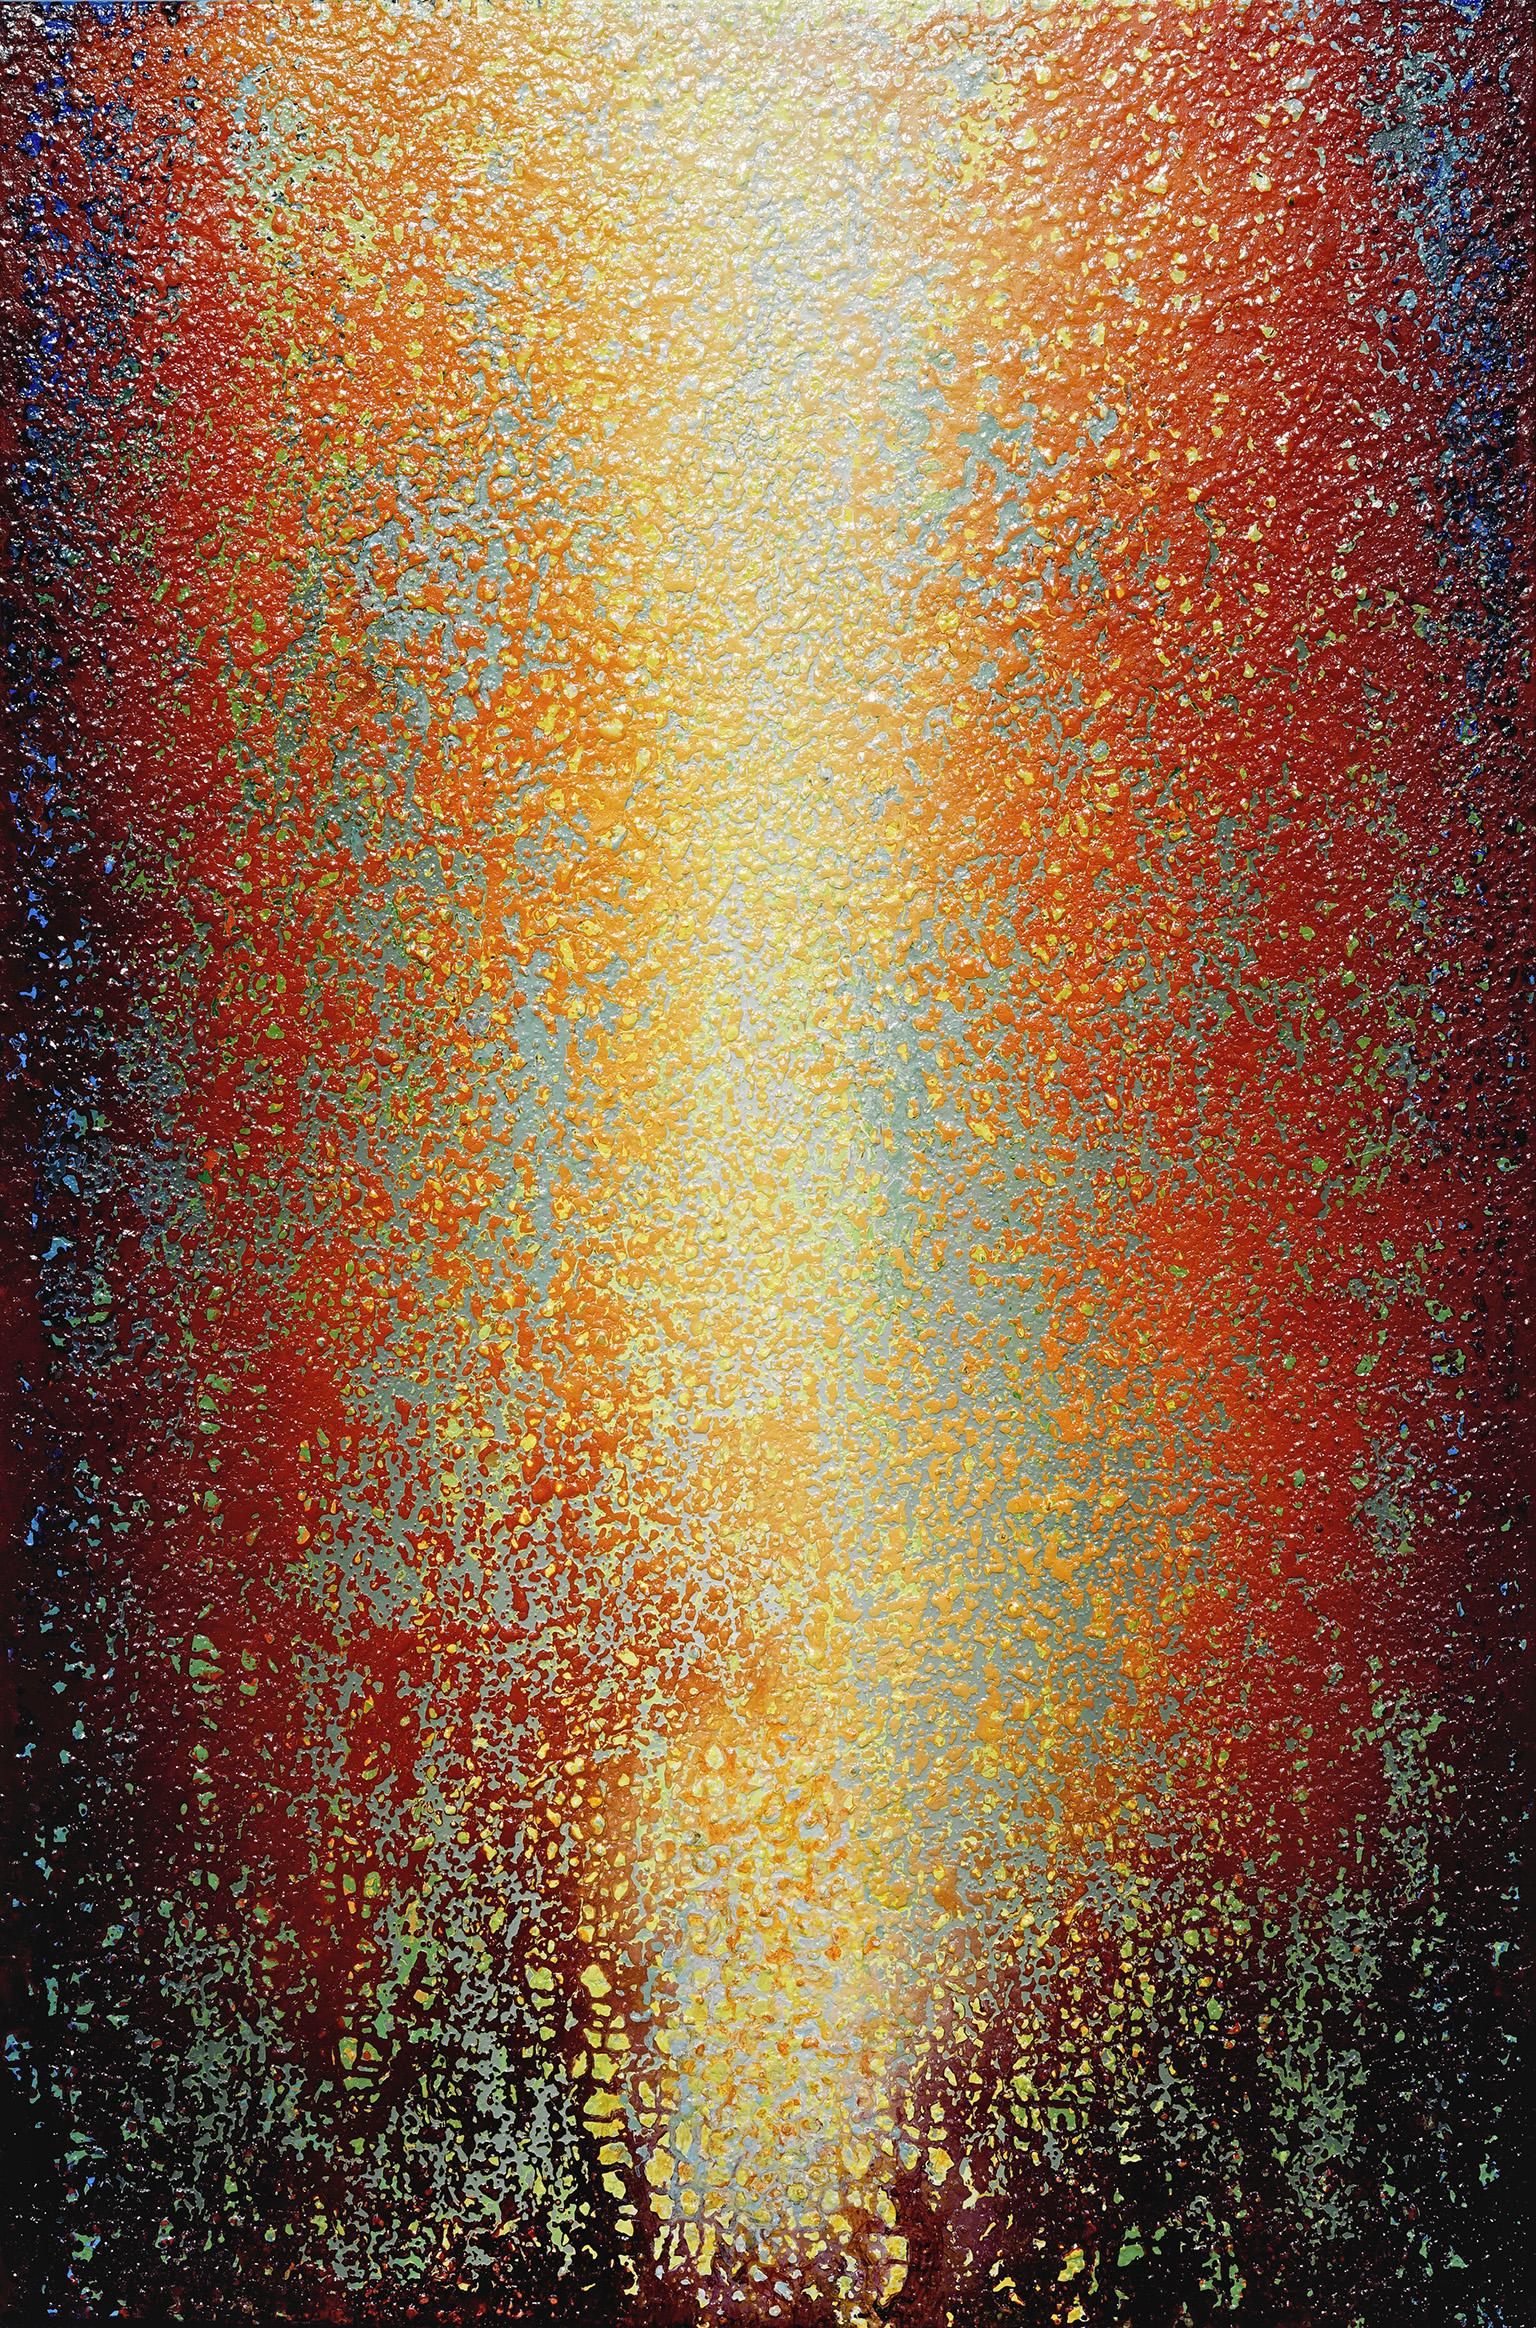 Heidi Thompson's "Empathy Awakened" is a 60 x 40 inch abstract painting on canvas. Unframed.
Rust, orange, and blue colors create a very poetic abstraction of color and light, reminiscent of nature and natural phenomena. The center of the painting